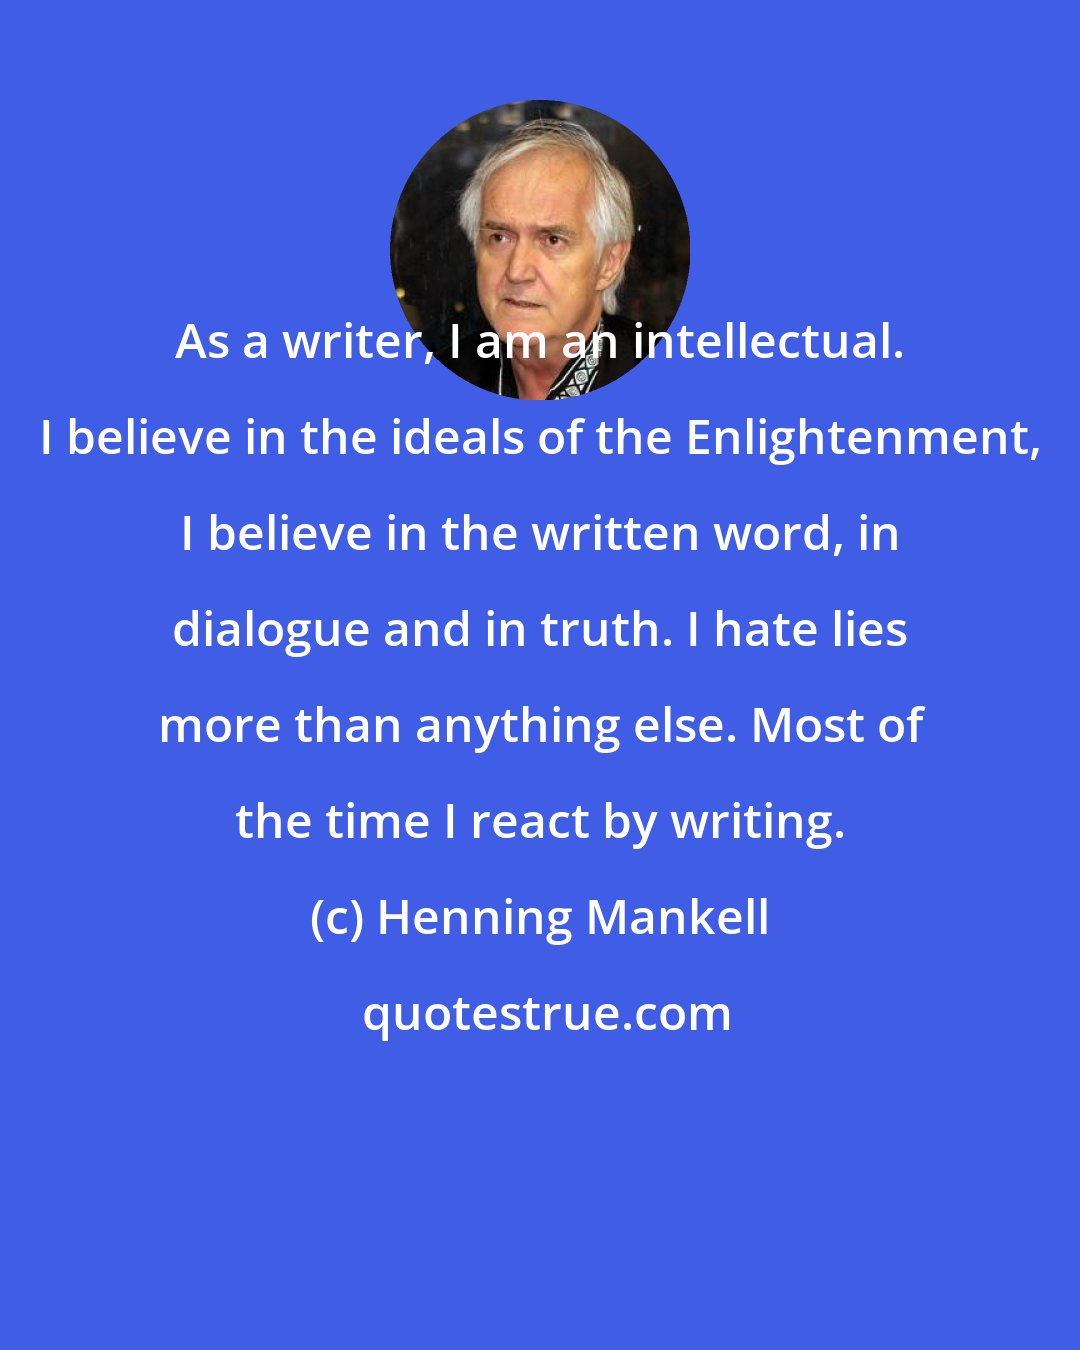 Henning Mankell: As a writer, I am an intellectual. I believe in the ideals of the Enlightenment, I believe in the written word, in dialogue and in truth. I hate lies more than anything else. Most of the time I react by writing.